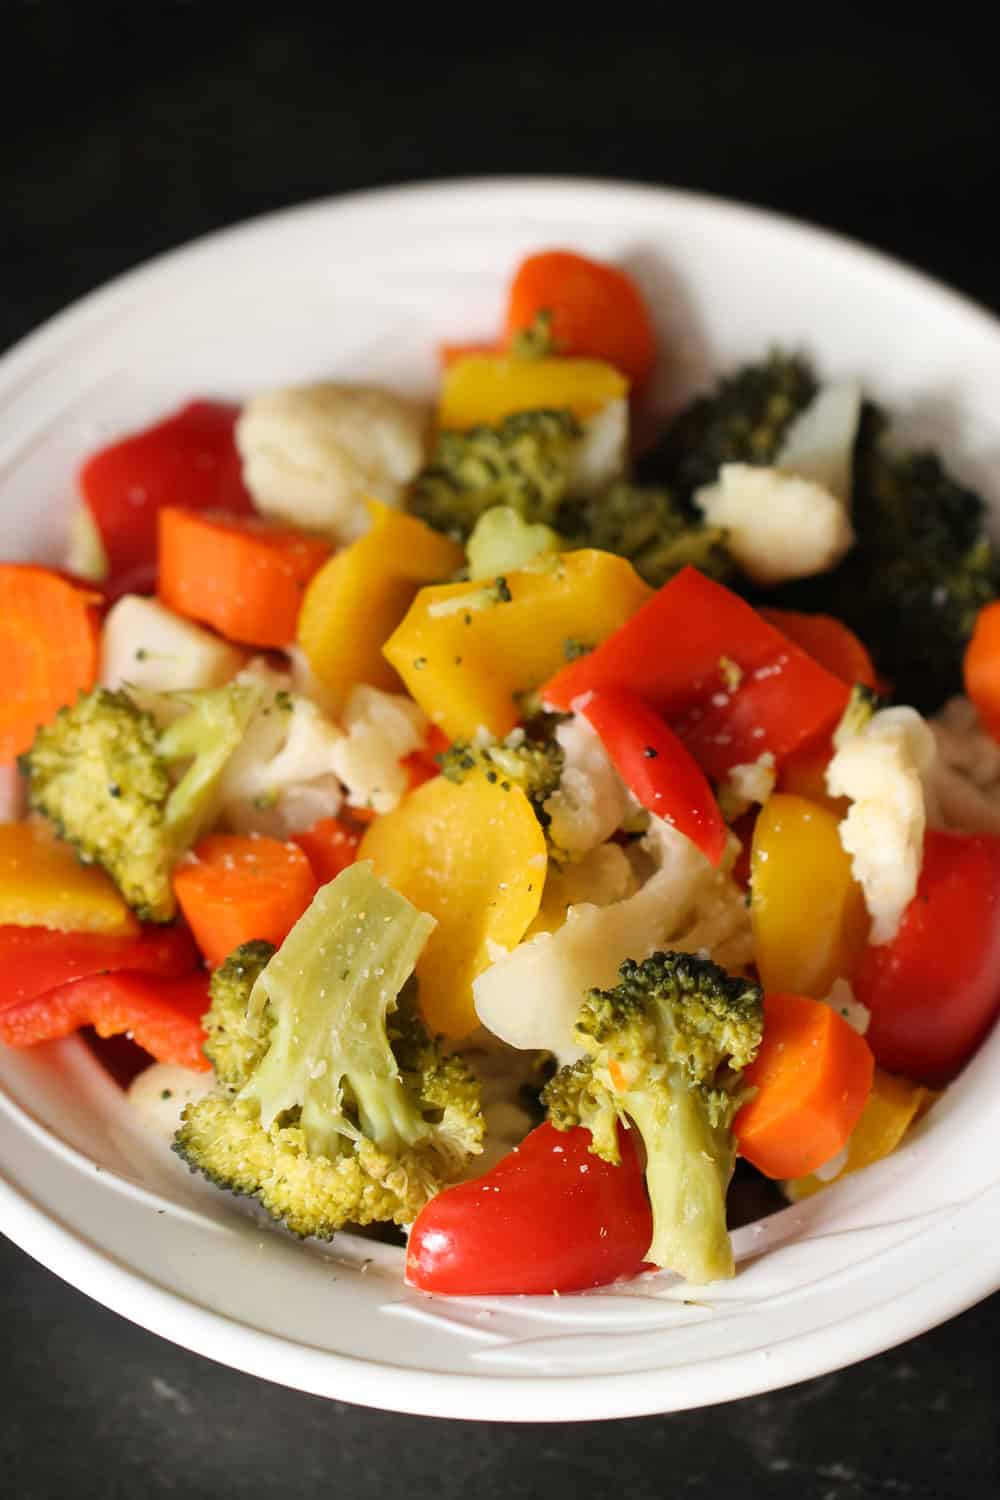 https://www.sixsistersstuff.com/wp-content/uploads/2020/04/Instant-Pot-Perfectly-Steamed-Vegetables-plated-on-six-sisters-stuff.jpg